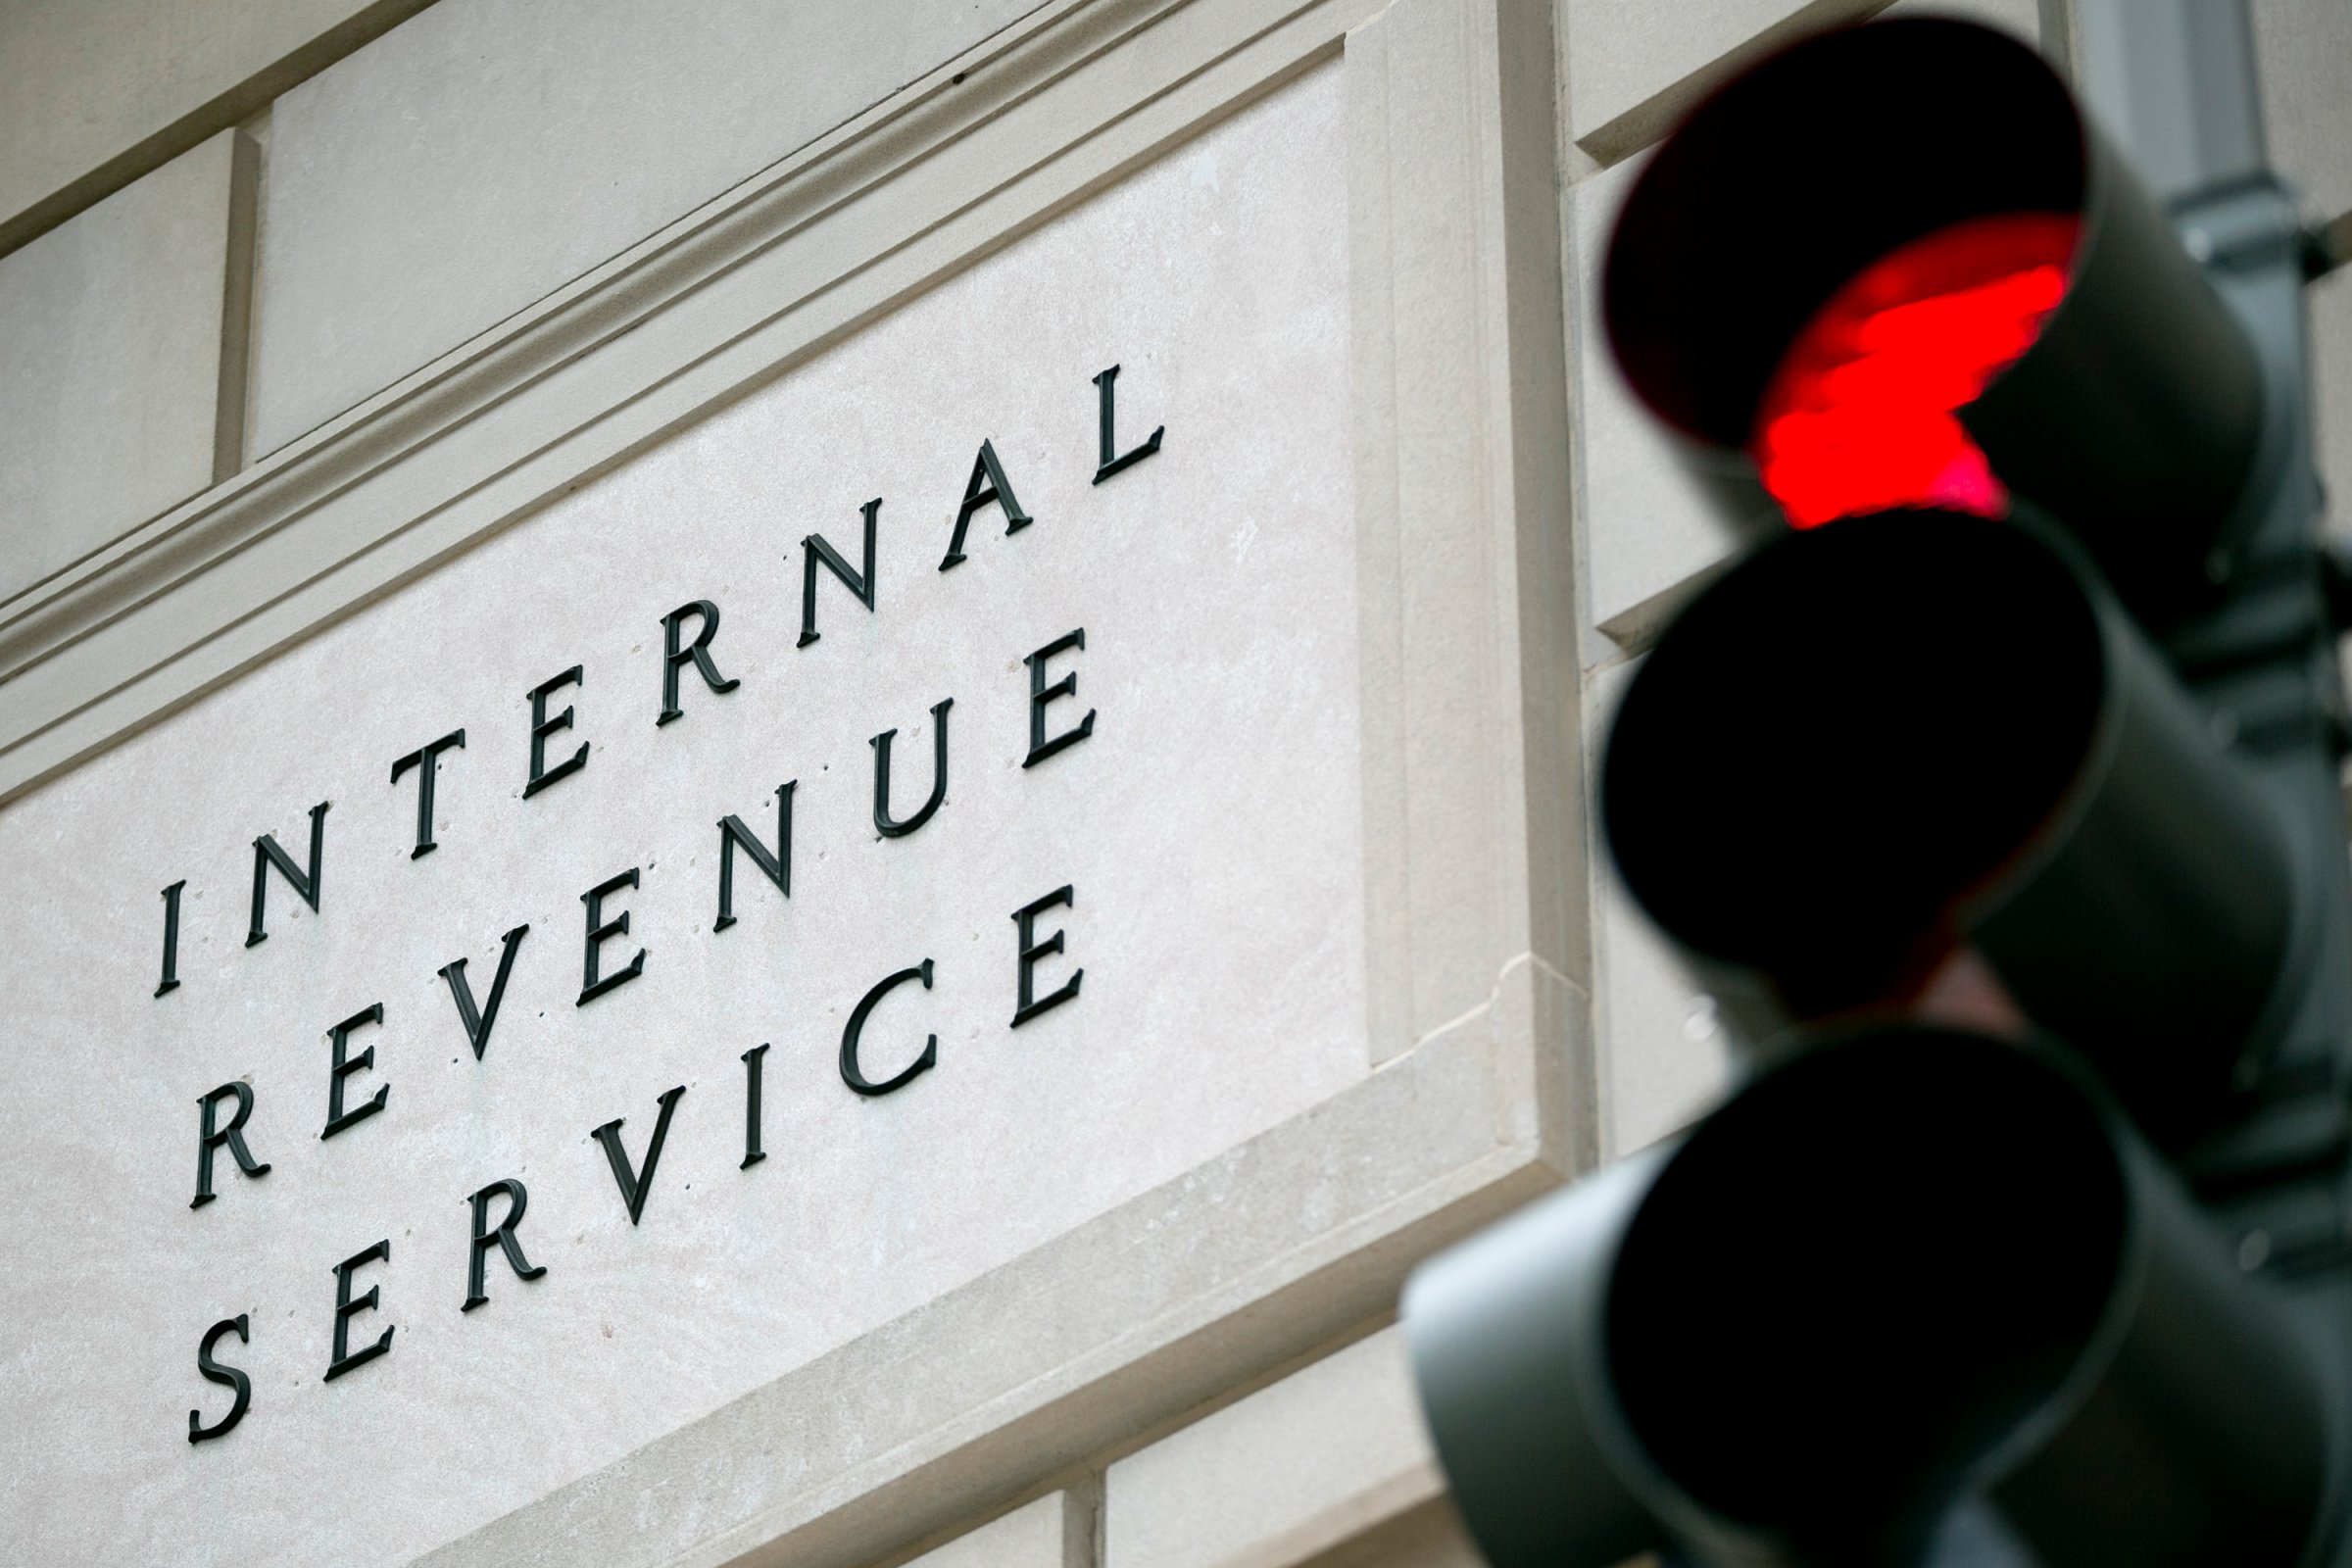 Congress Focuses On IRS Delay In Disclosing Groups' Scrutiny